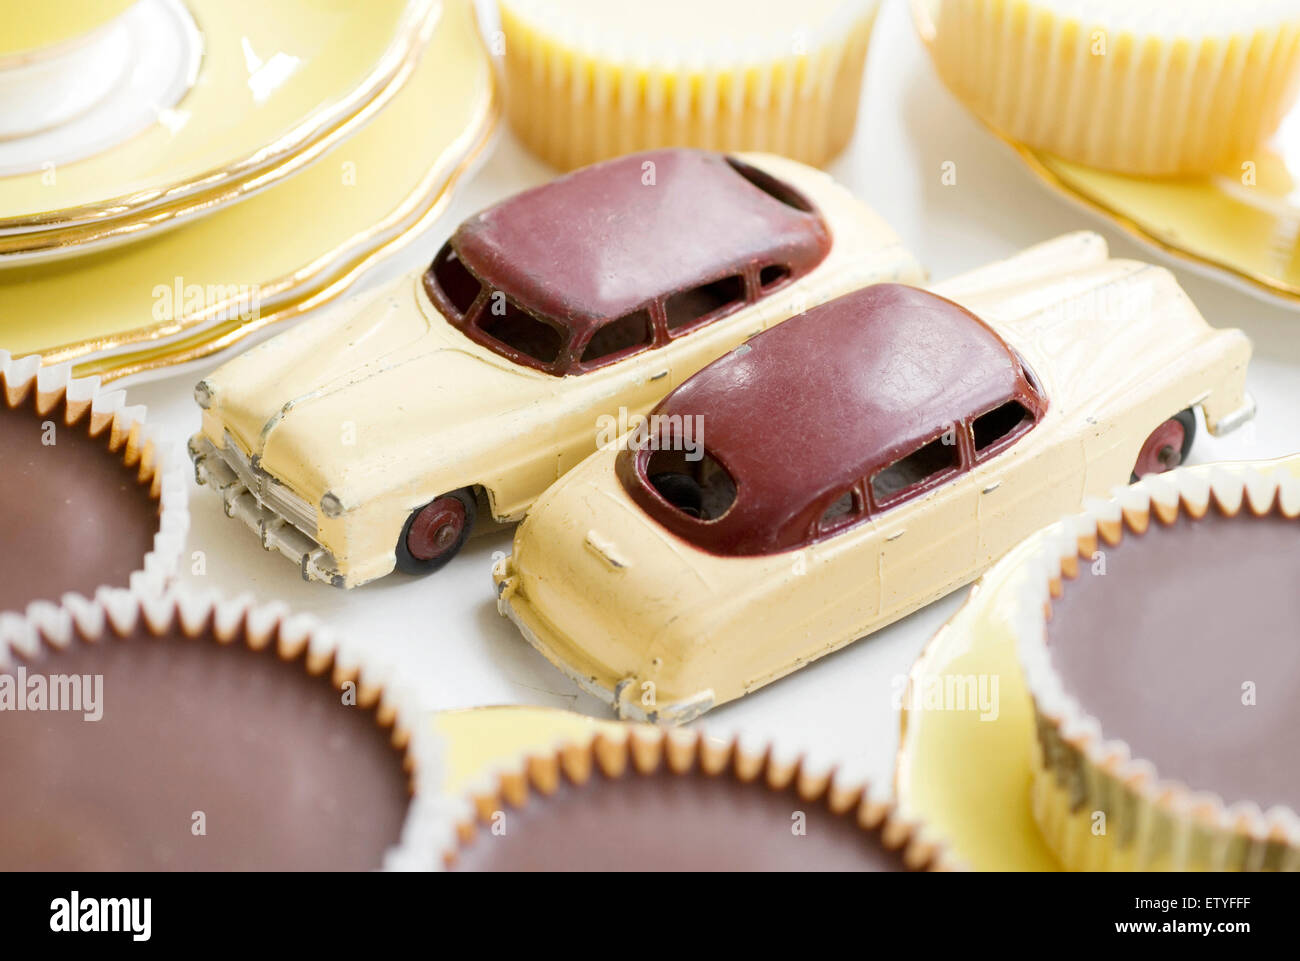 Pair of Dinky cars surrounded by cup cakes of a similar colour Stock Photo